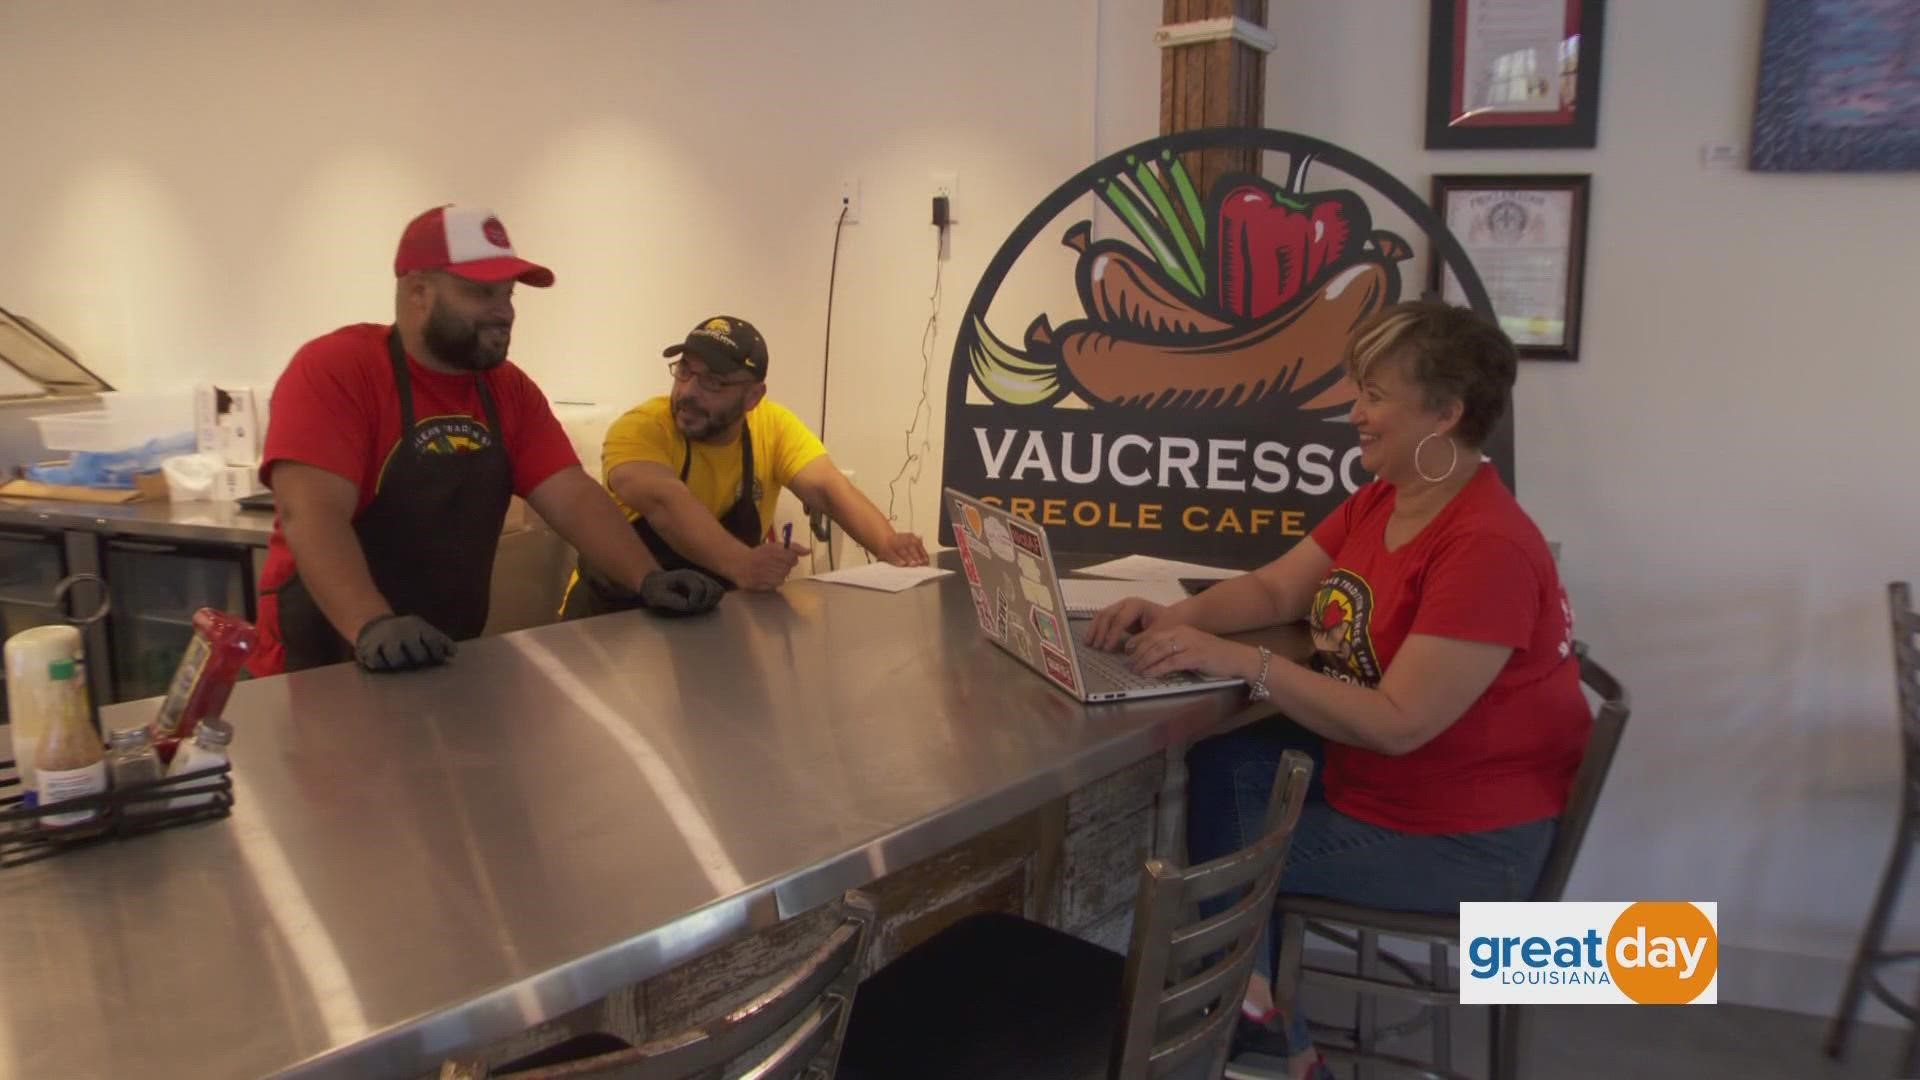 Vaucresson's Sausage opens a new cafe in the 7th Ward and we stopped by to talk history and check out the menu.